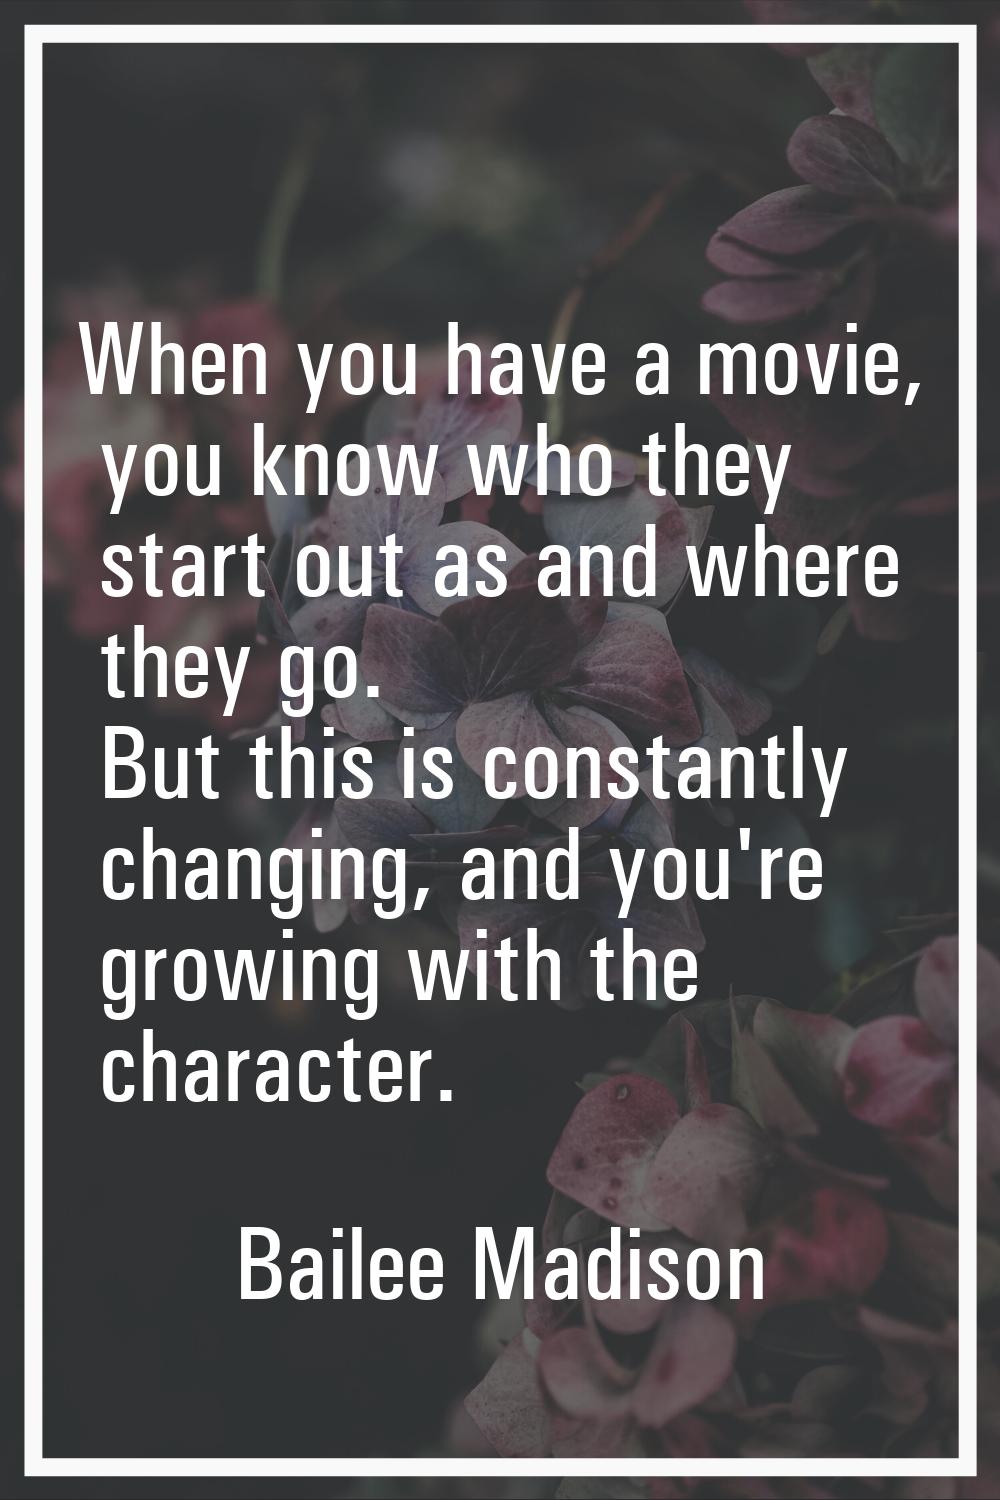 When you have a movie, you know who they start out as and where they go. But this is constantly cha